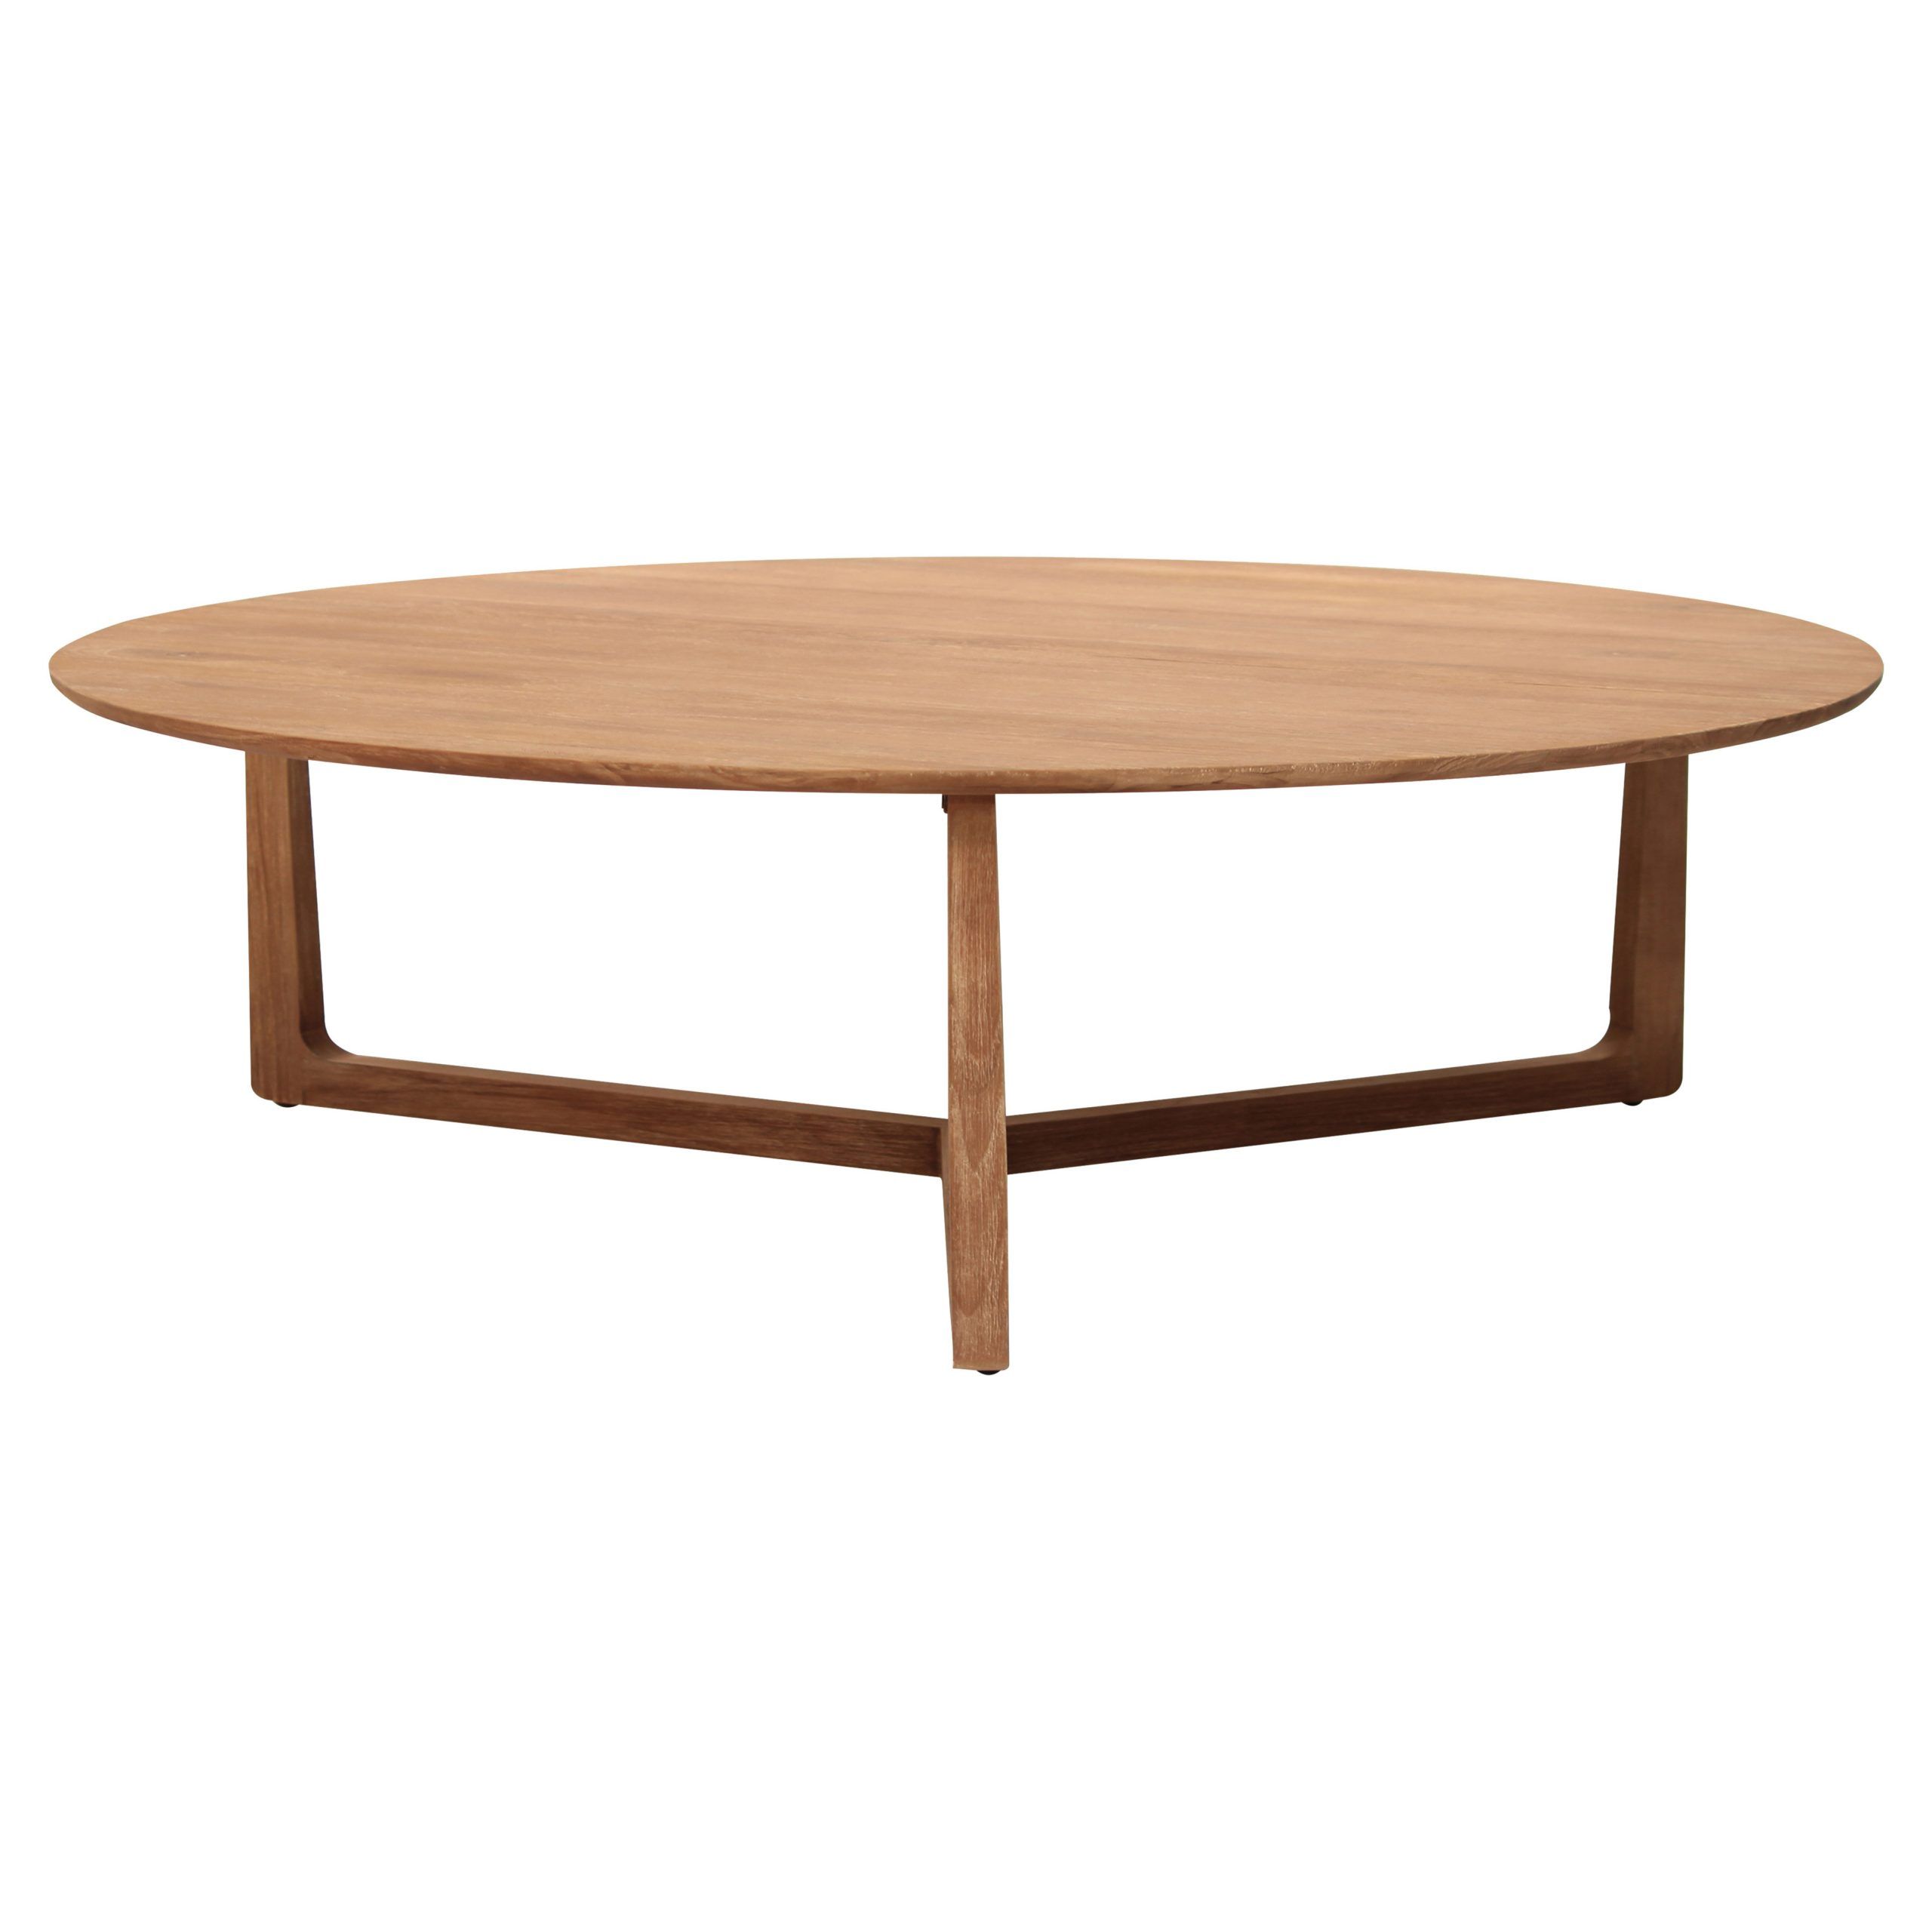 Laura Modern Classic White Washed Teak Wood Round Coffee Intended For Popular Oceanside White Washed Coffee Tables (View 1 of 20)